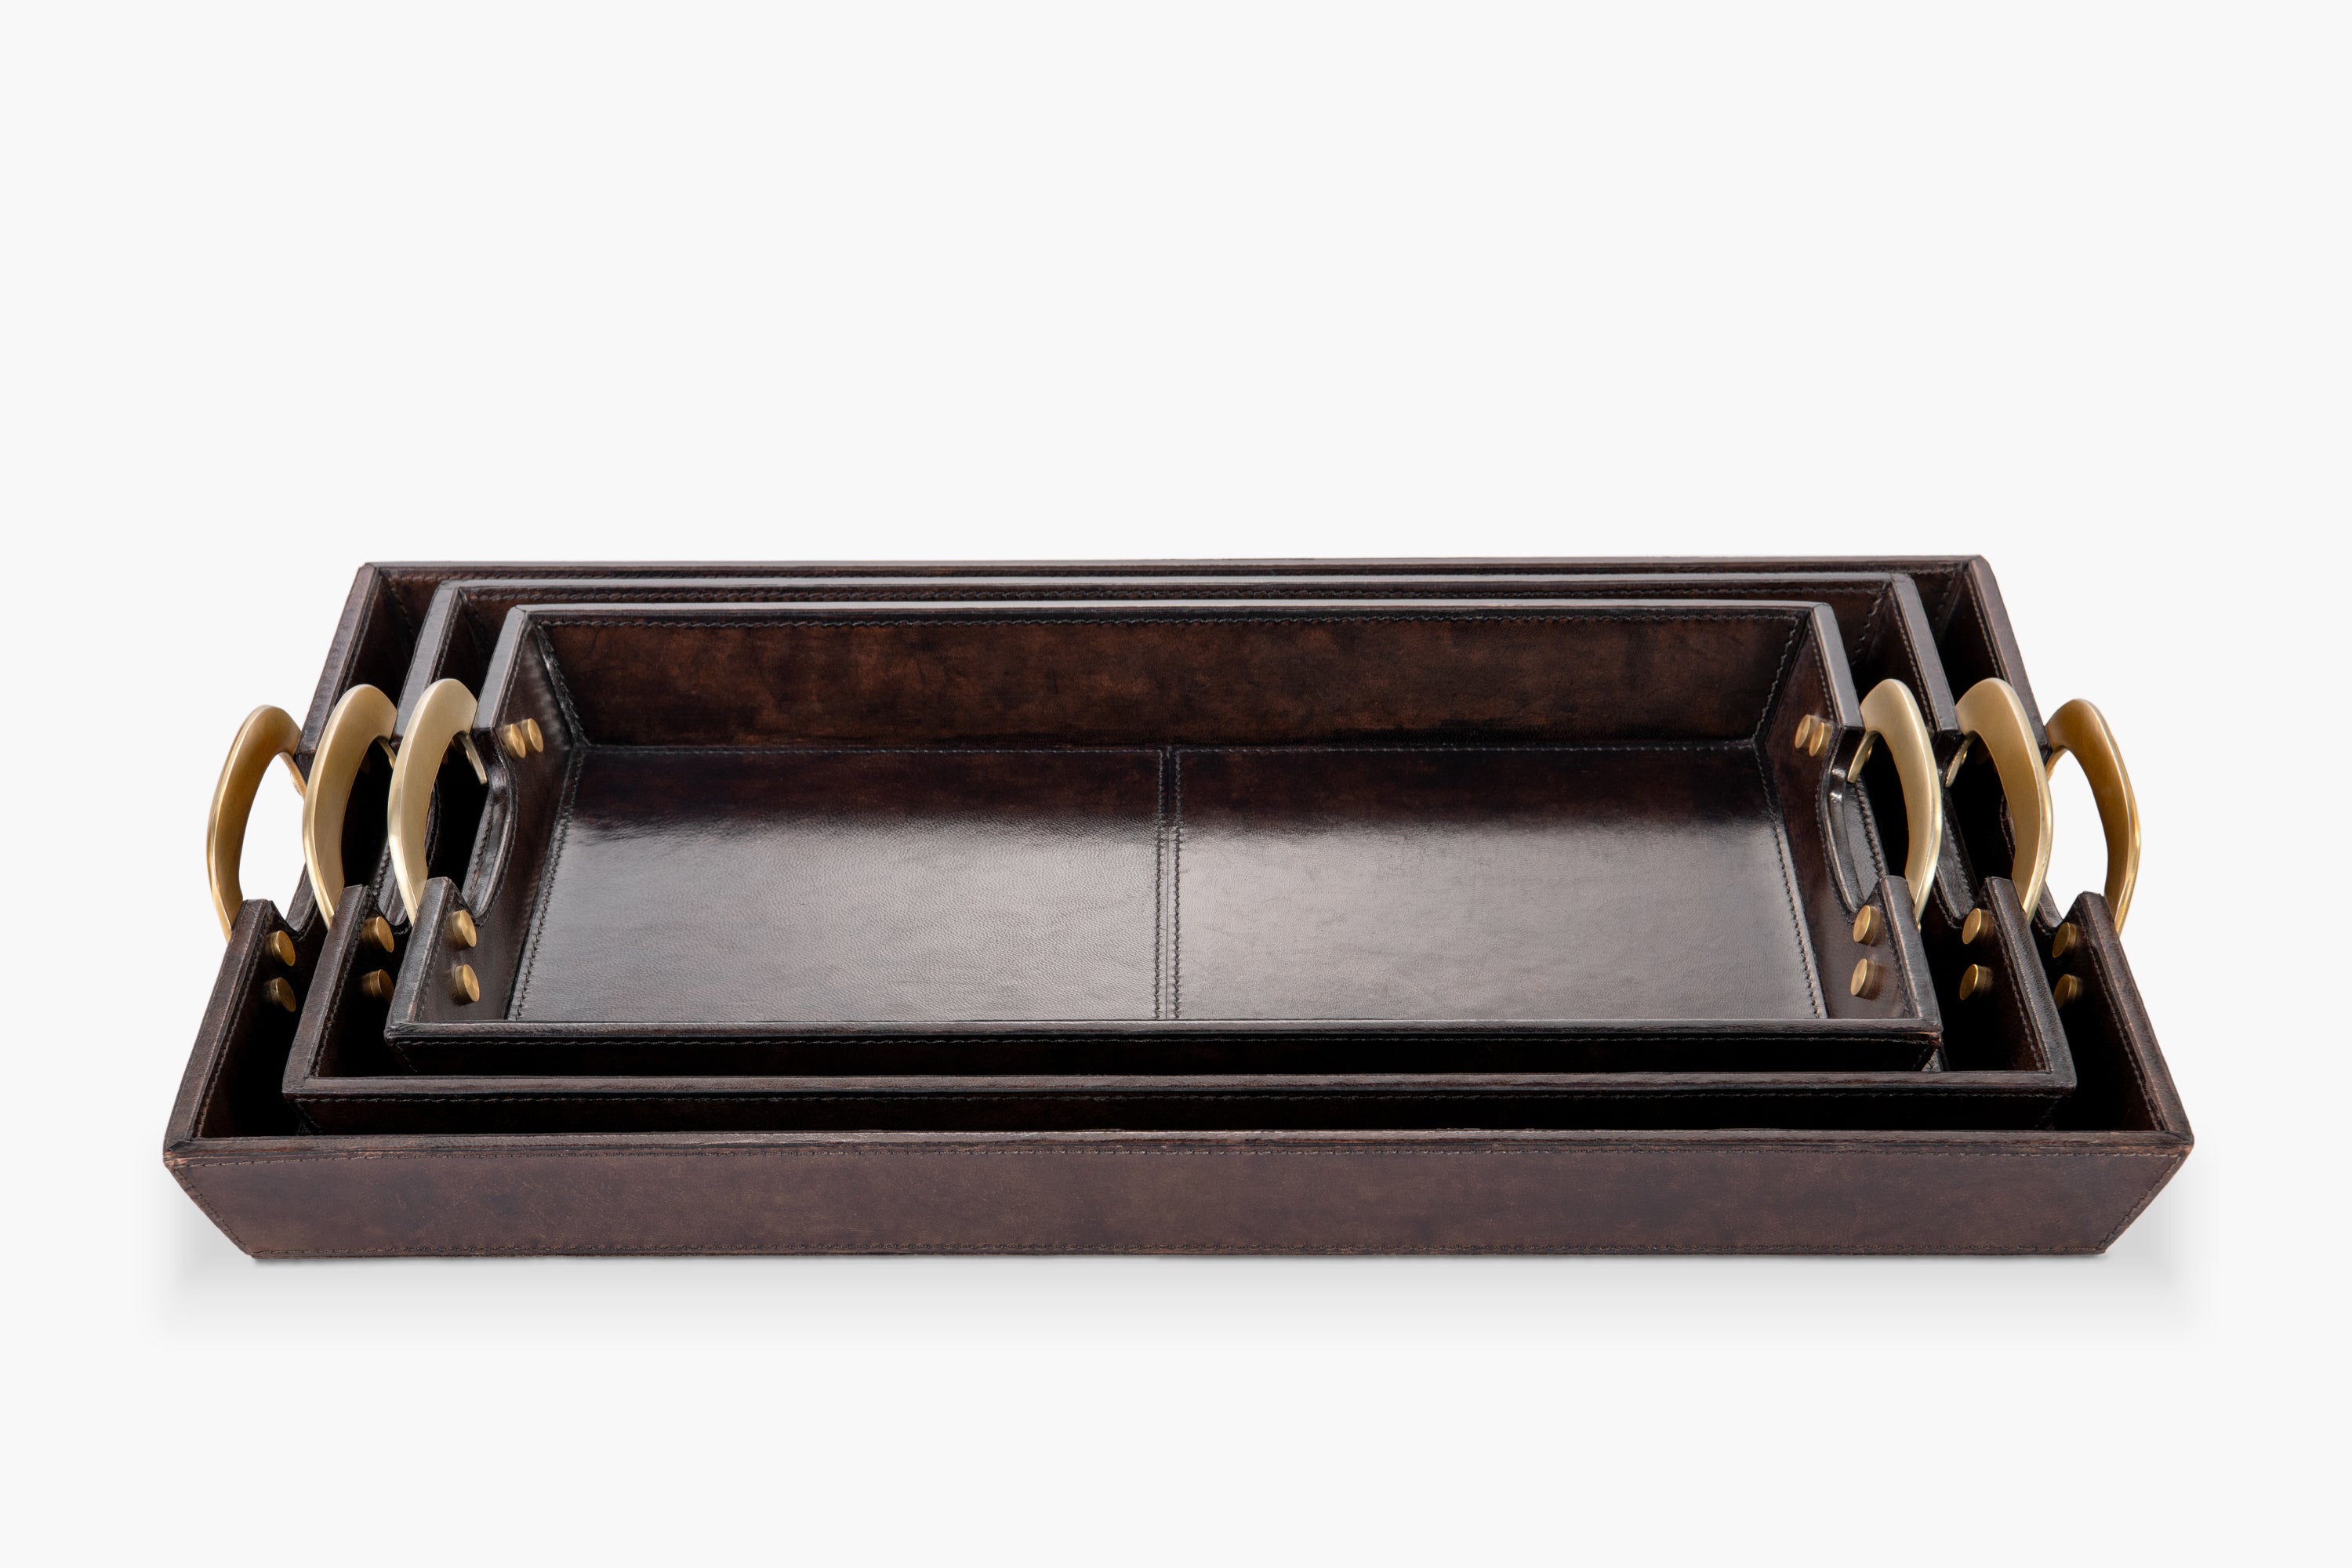 24 X 36 Large Rectangle Tray With Handles, Coffee Table Ottoman